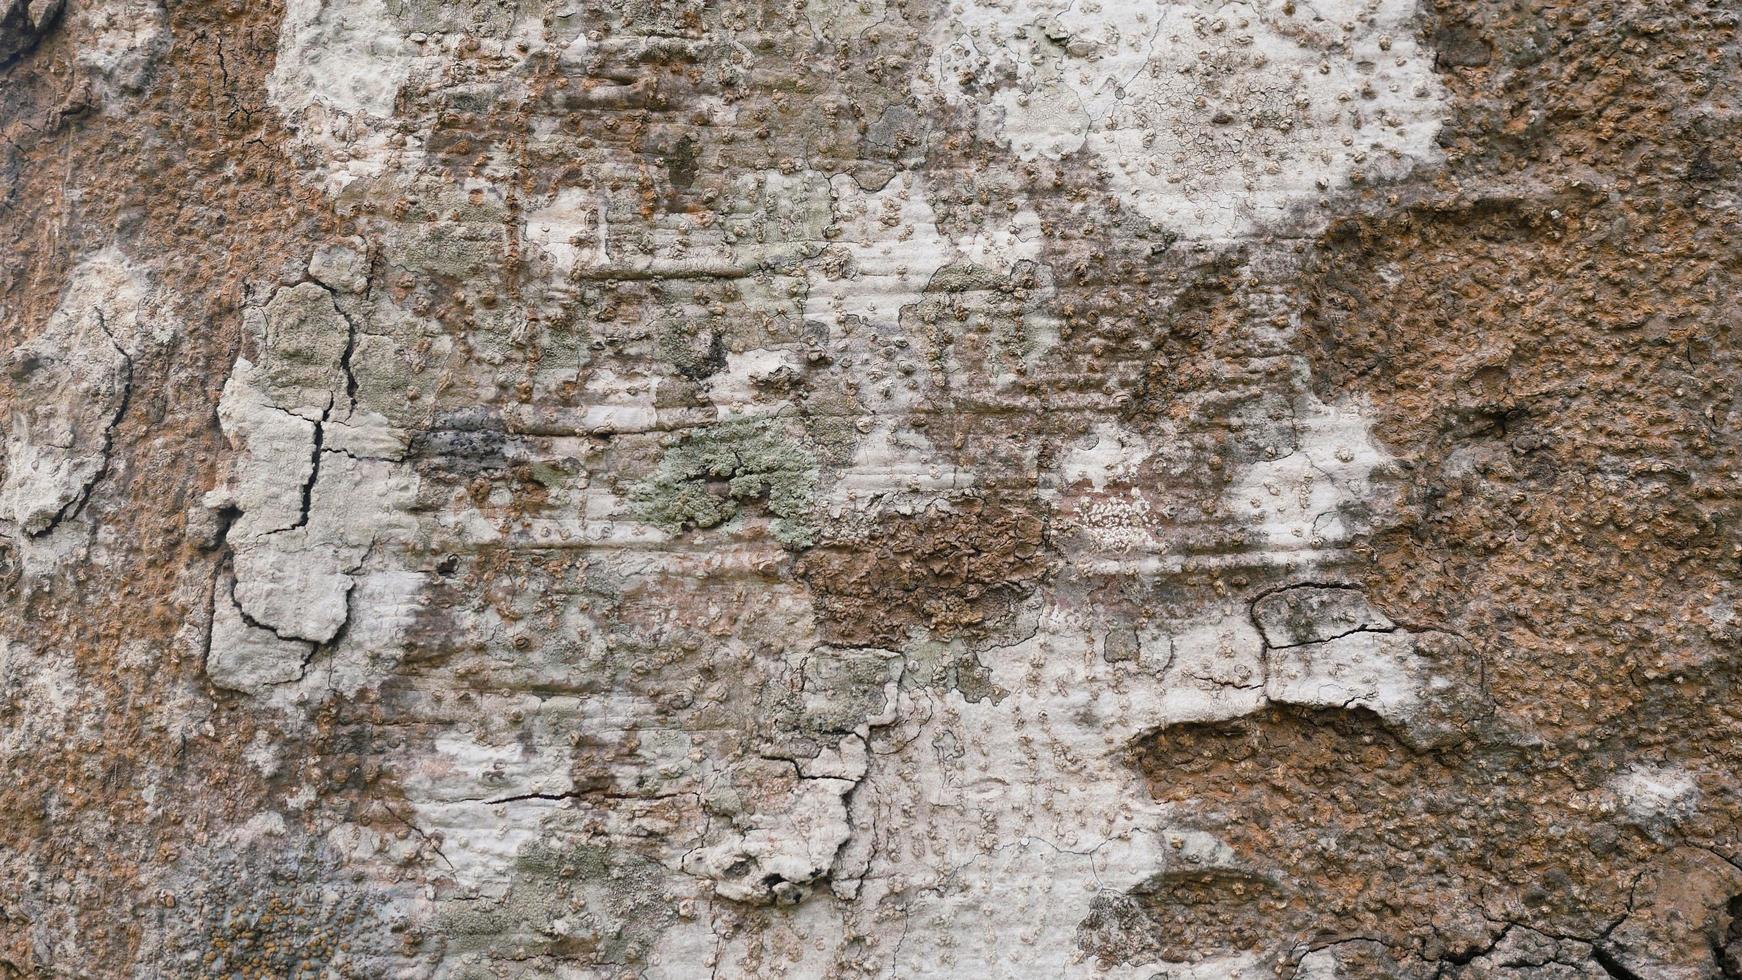 Bark from brown trees, rough surfaces, aging trunks. For making backgrounds or design designs. photo